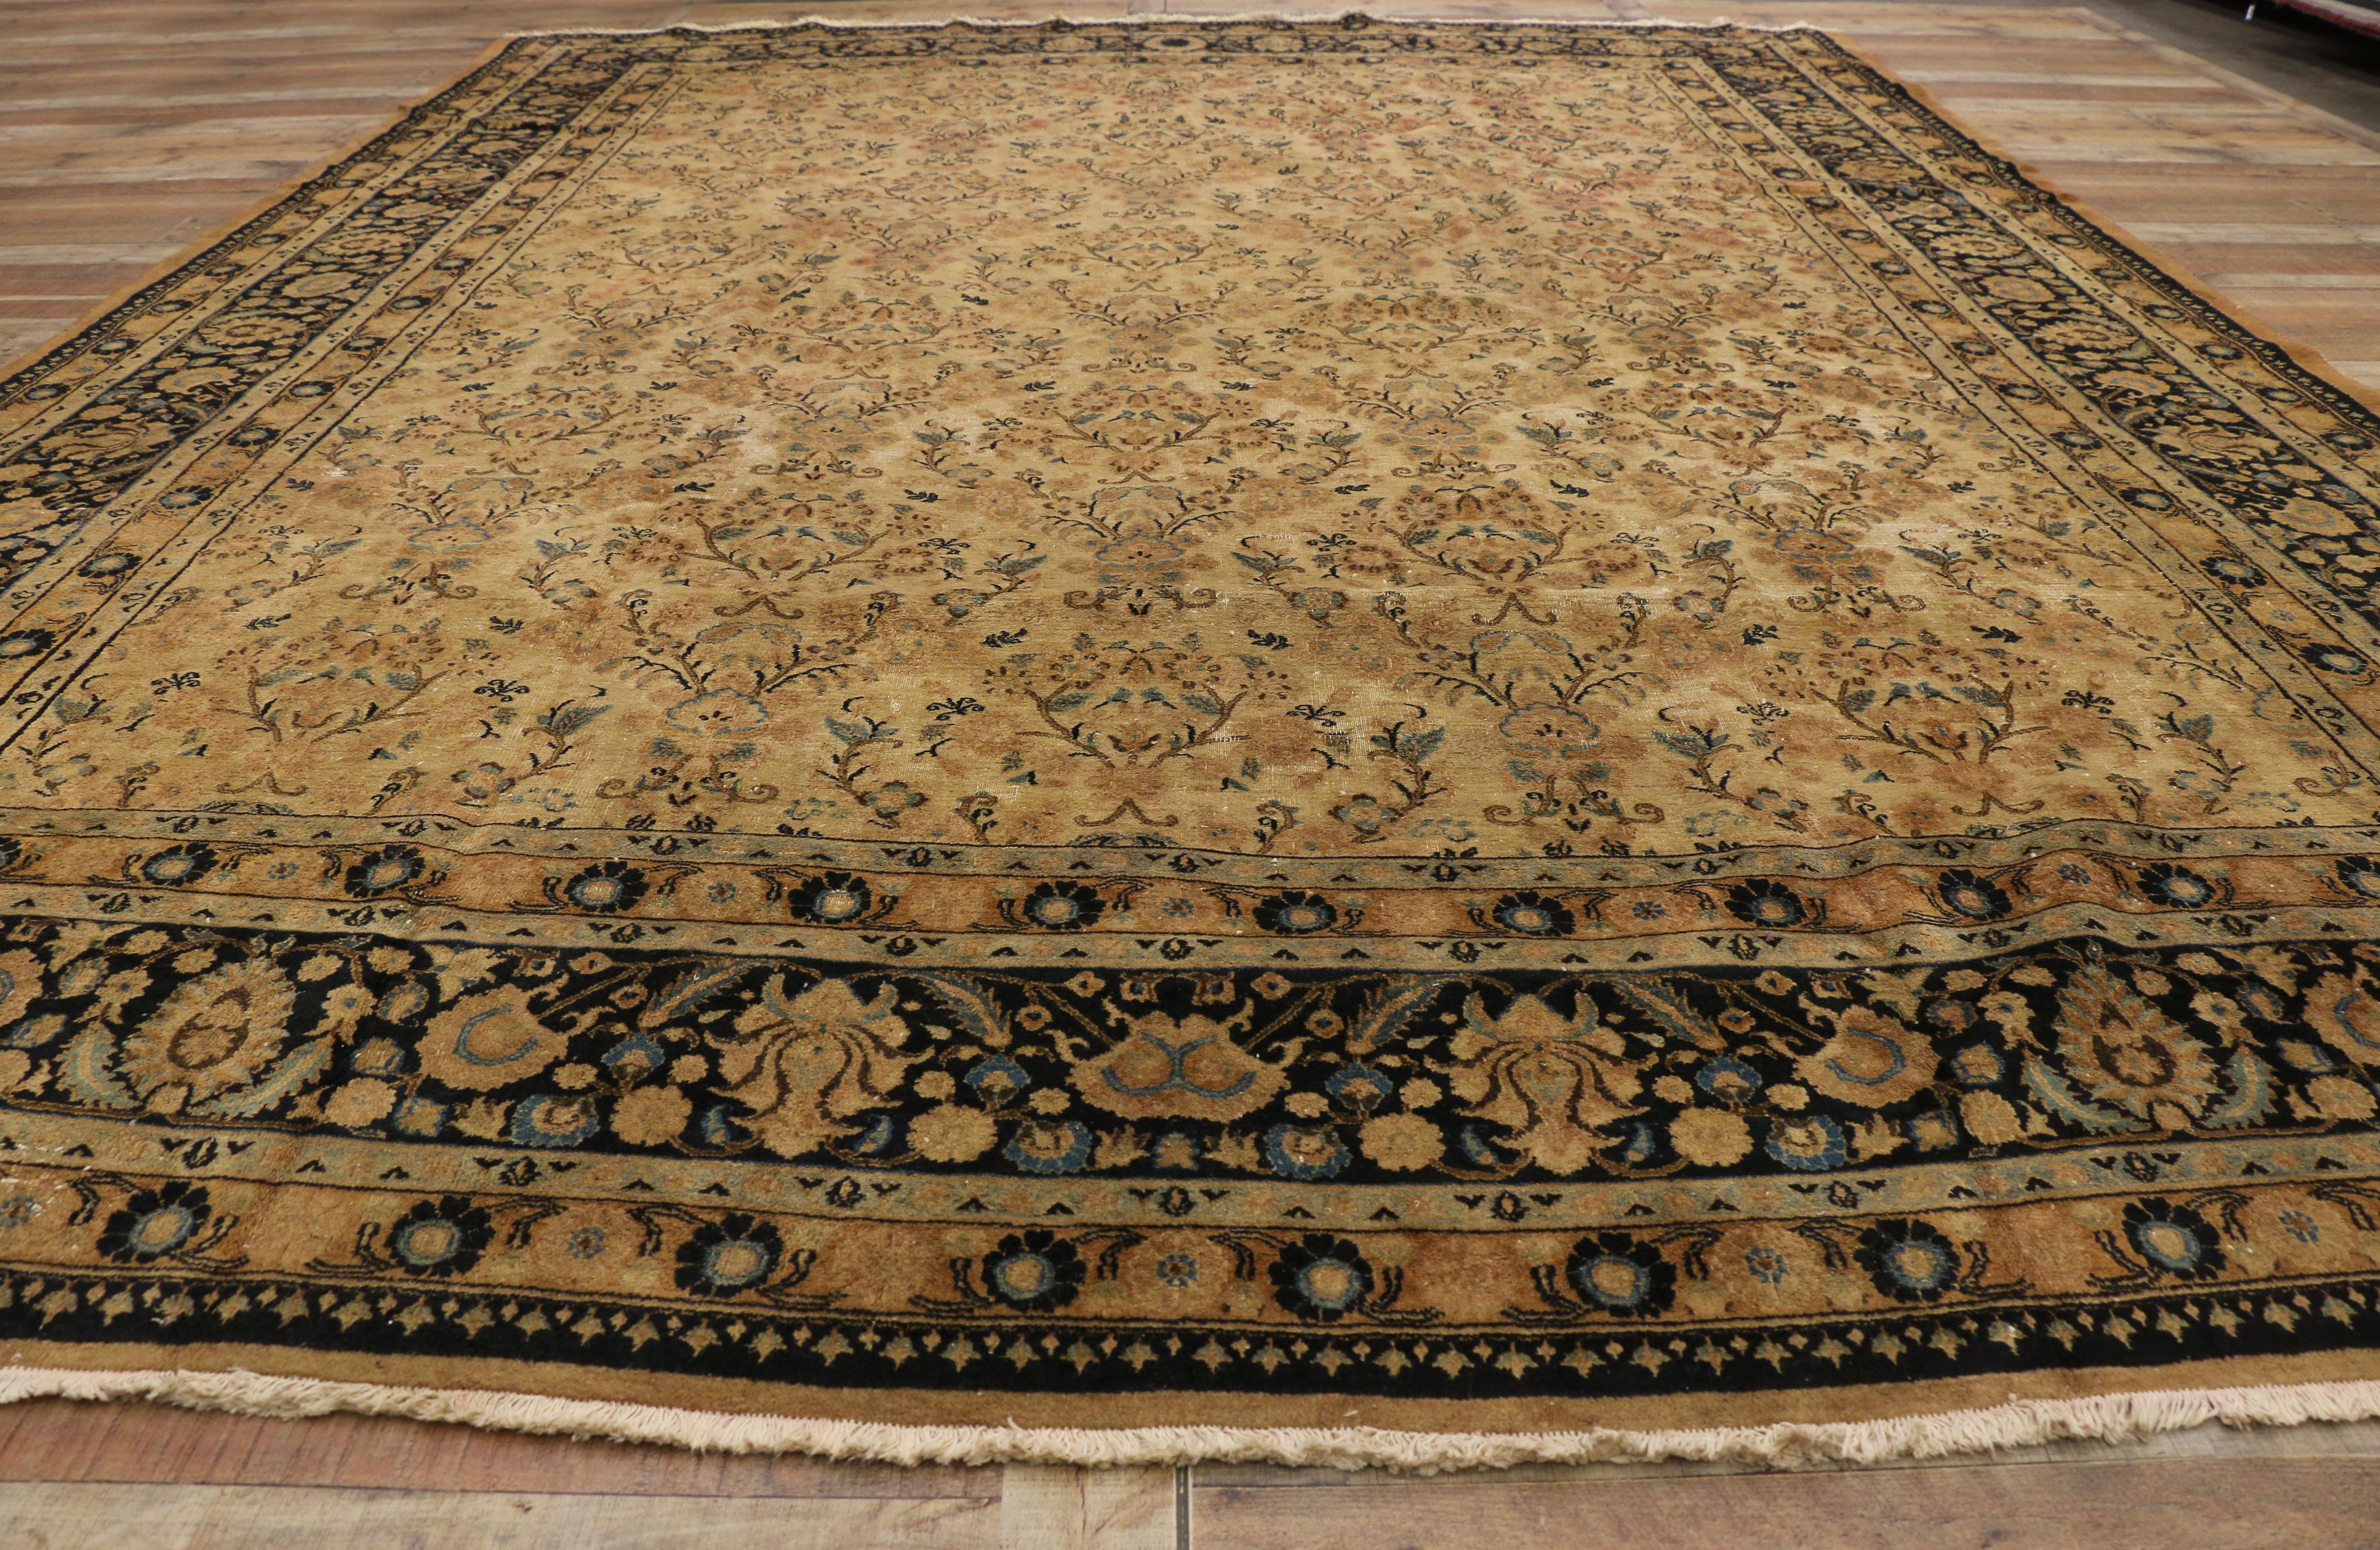 Antique Persian Mashhad Rug with Shabby Chic Rustic European Cottage Style In Distressed Condition For Sale In Dallas, TX